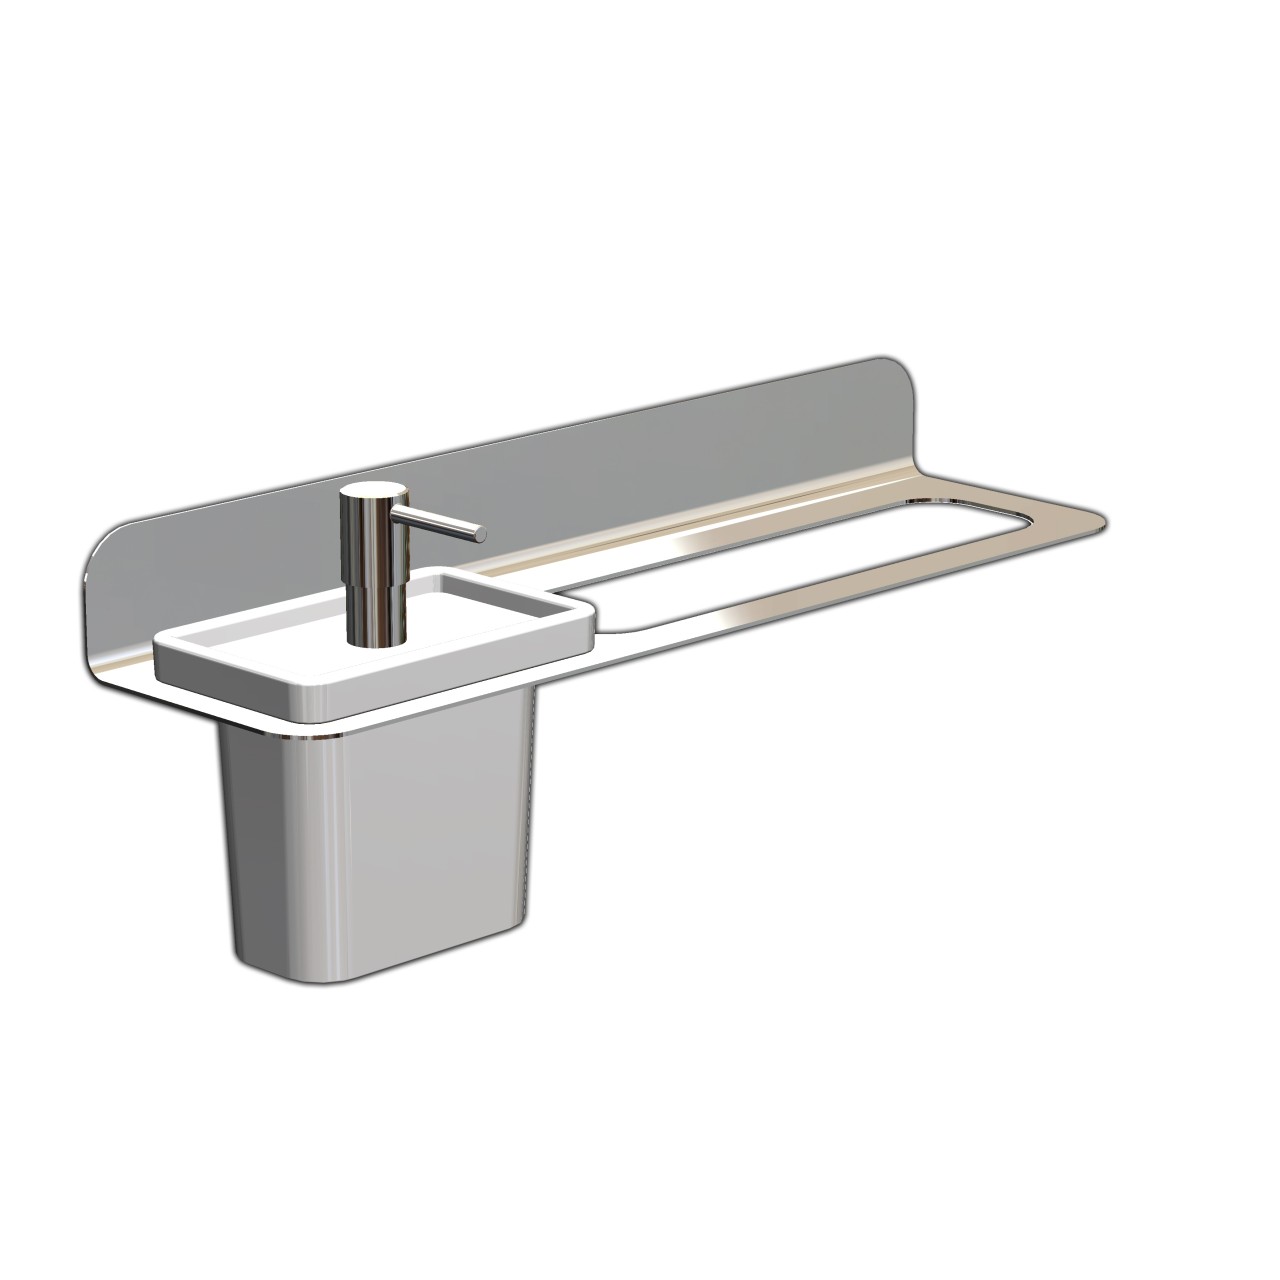 Fittings - Stainless Steel Single Towel Rail With Liquid Soap Holder